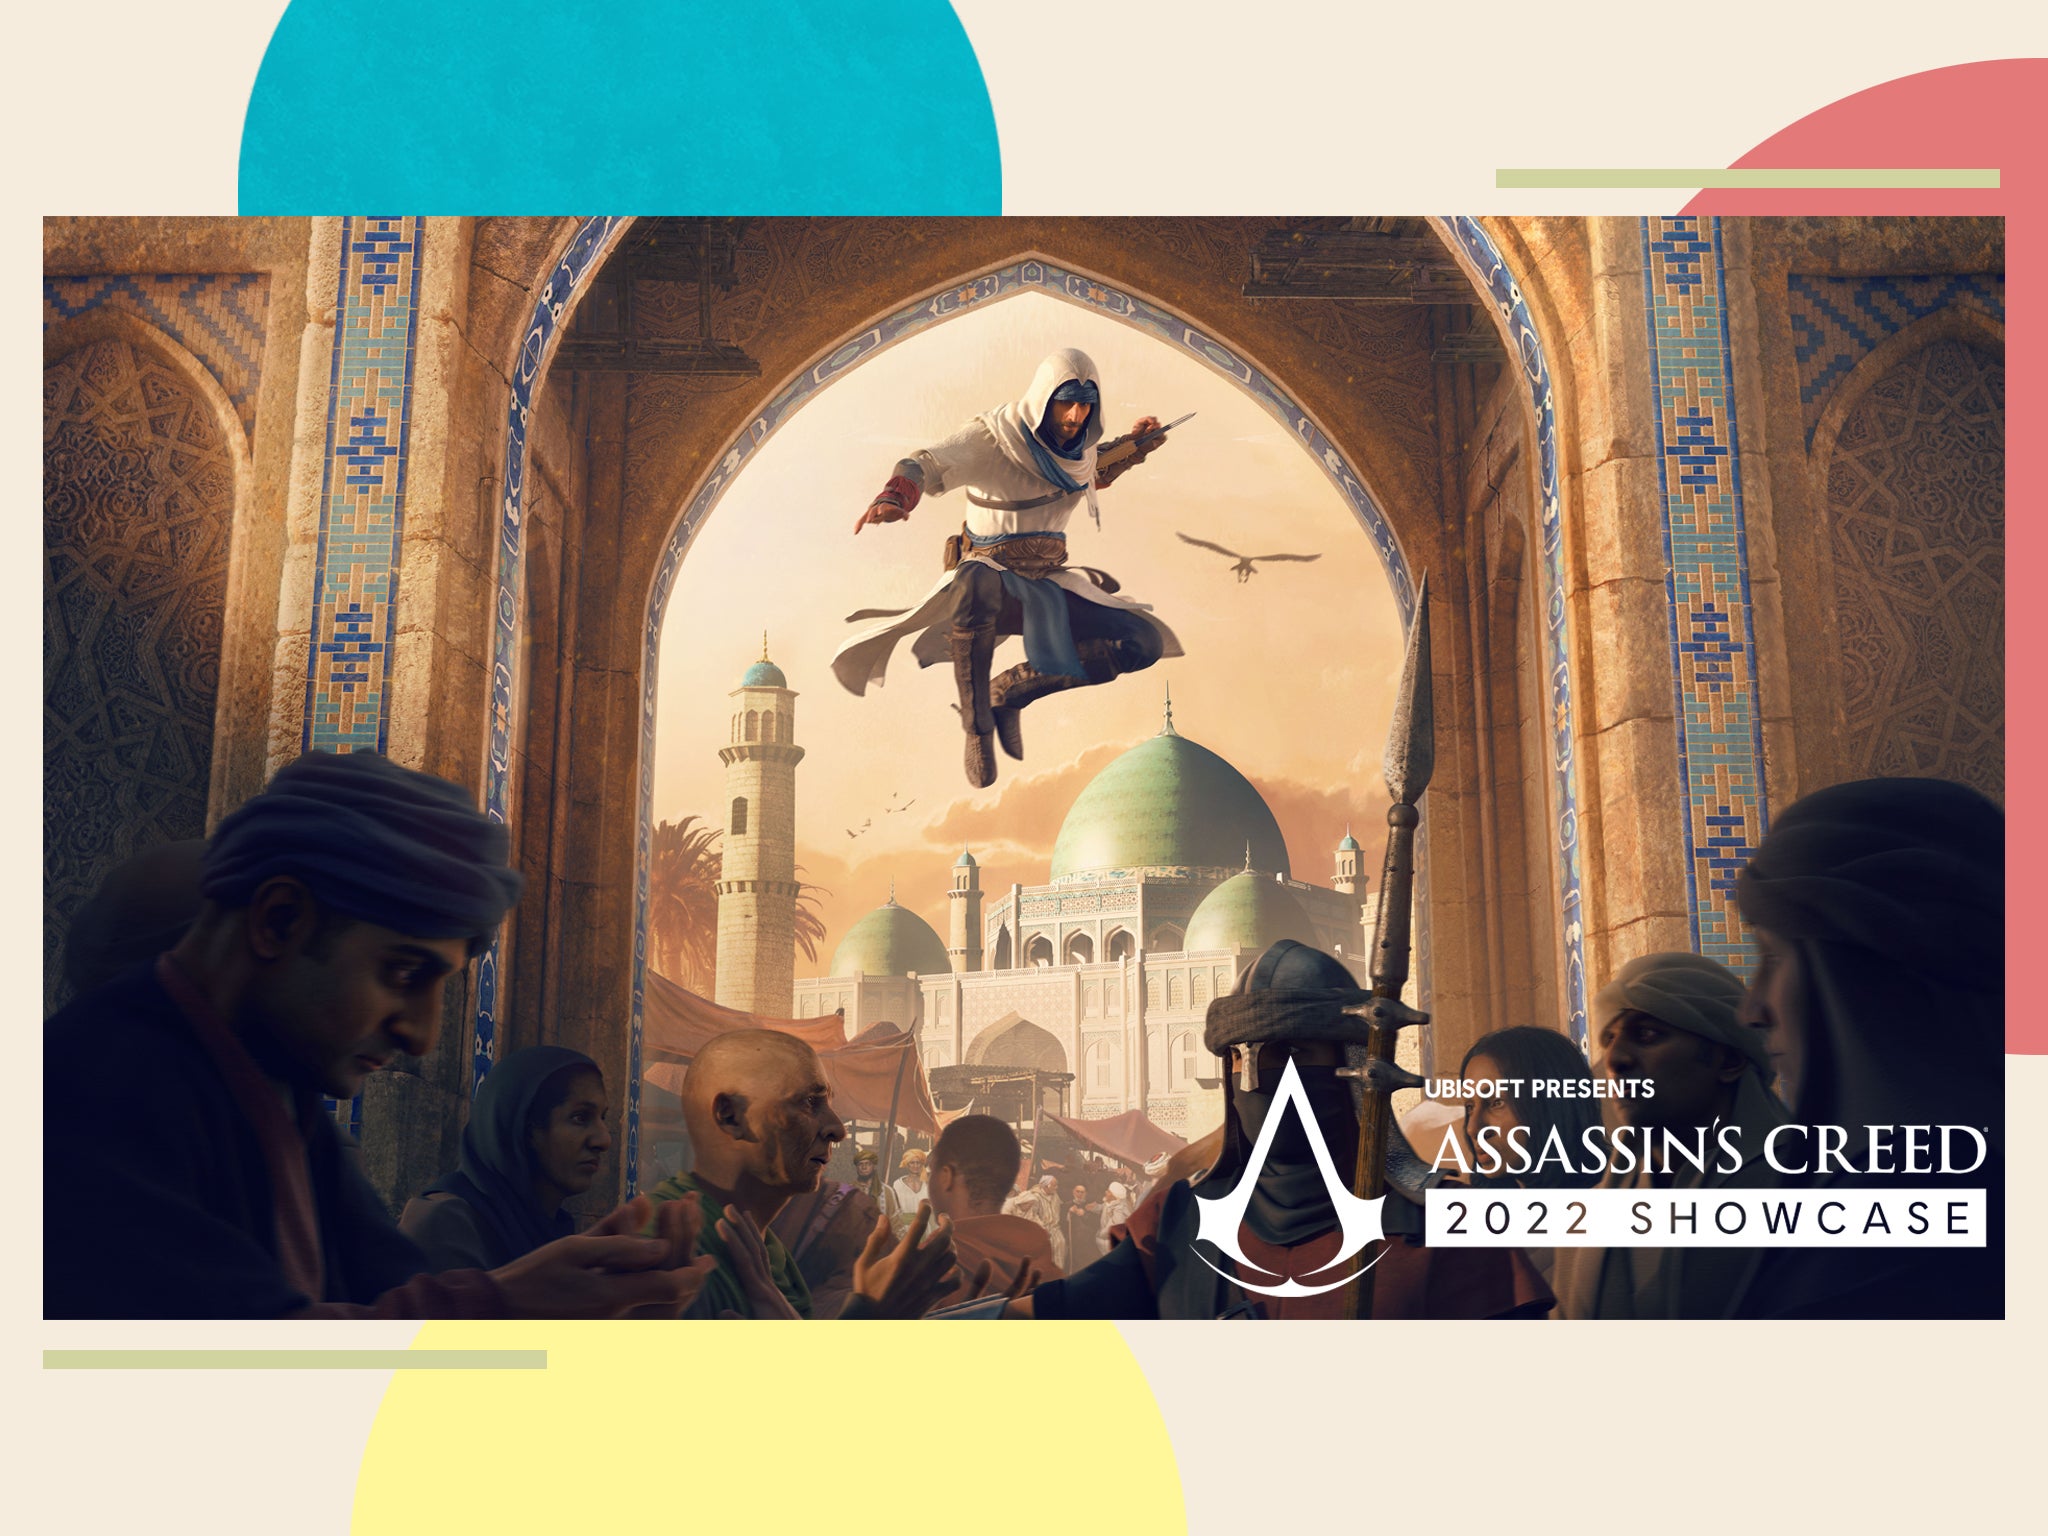 Four new Assassin's Creed games announced at Ubisoft Forward 2022